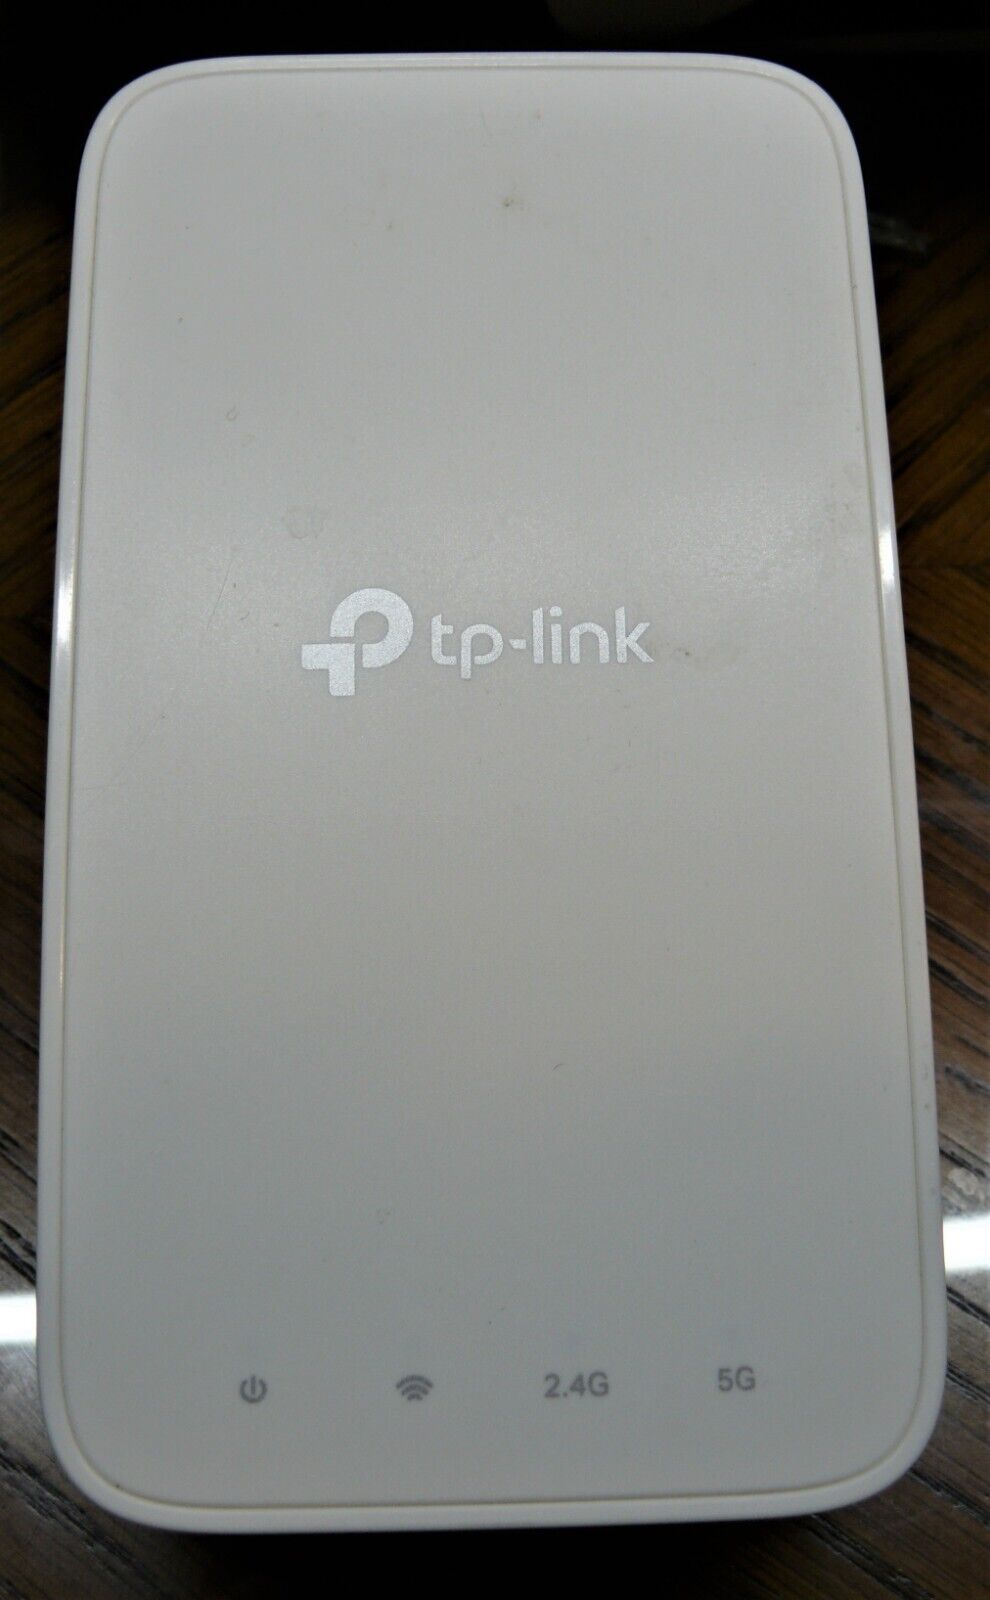 TP-Link Network RE300 AC1200 Dual Band (2.4/5G) Wi-Fi Range Extender